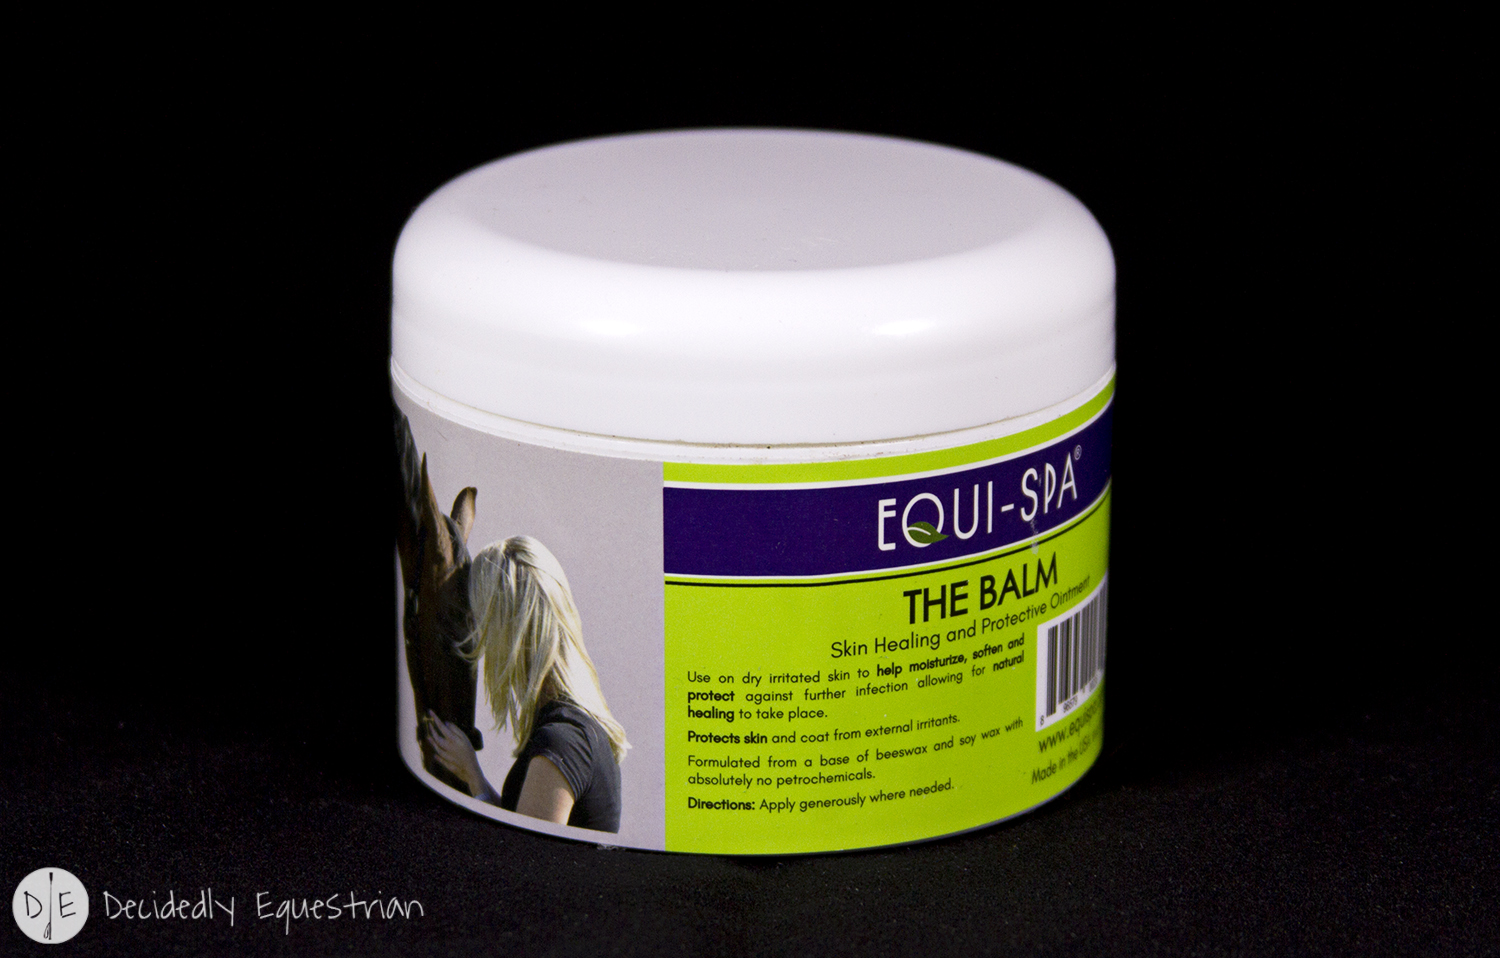 Shop for A Cause: Equi-Spa The Balm